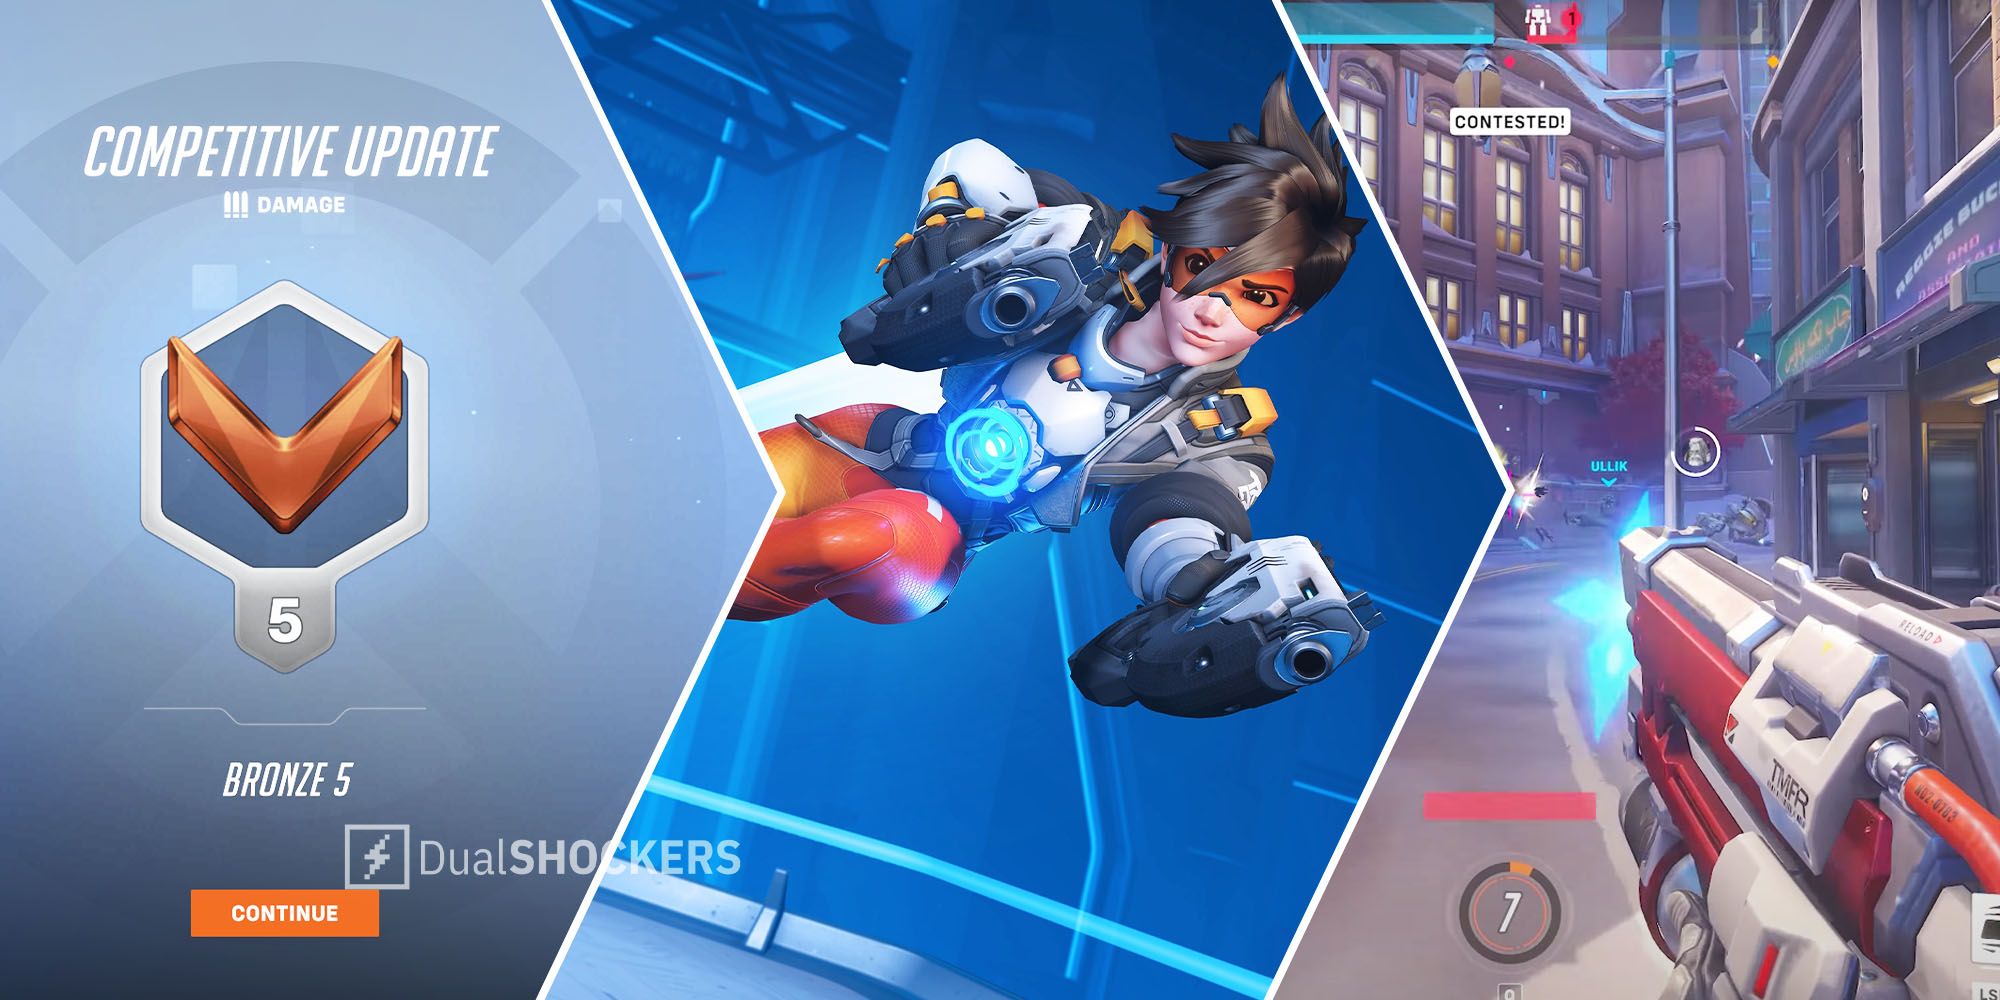 Overwatch 2 Bronze 5 update with Tracer aimin weapons at the screen